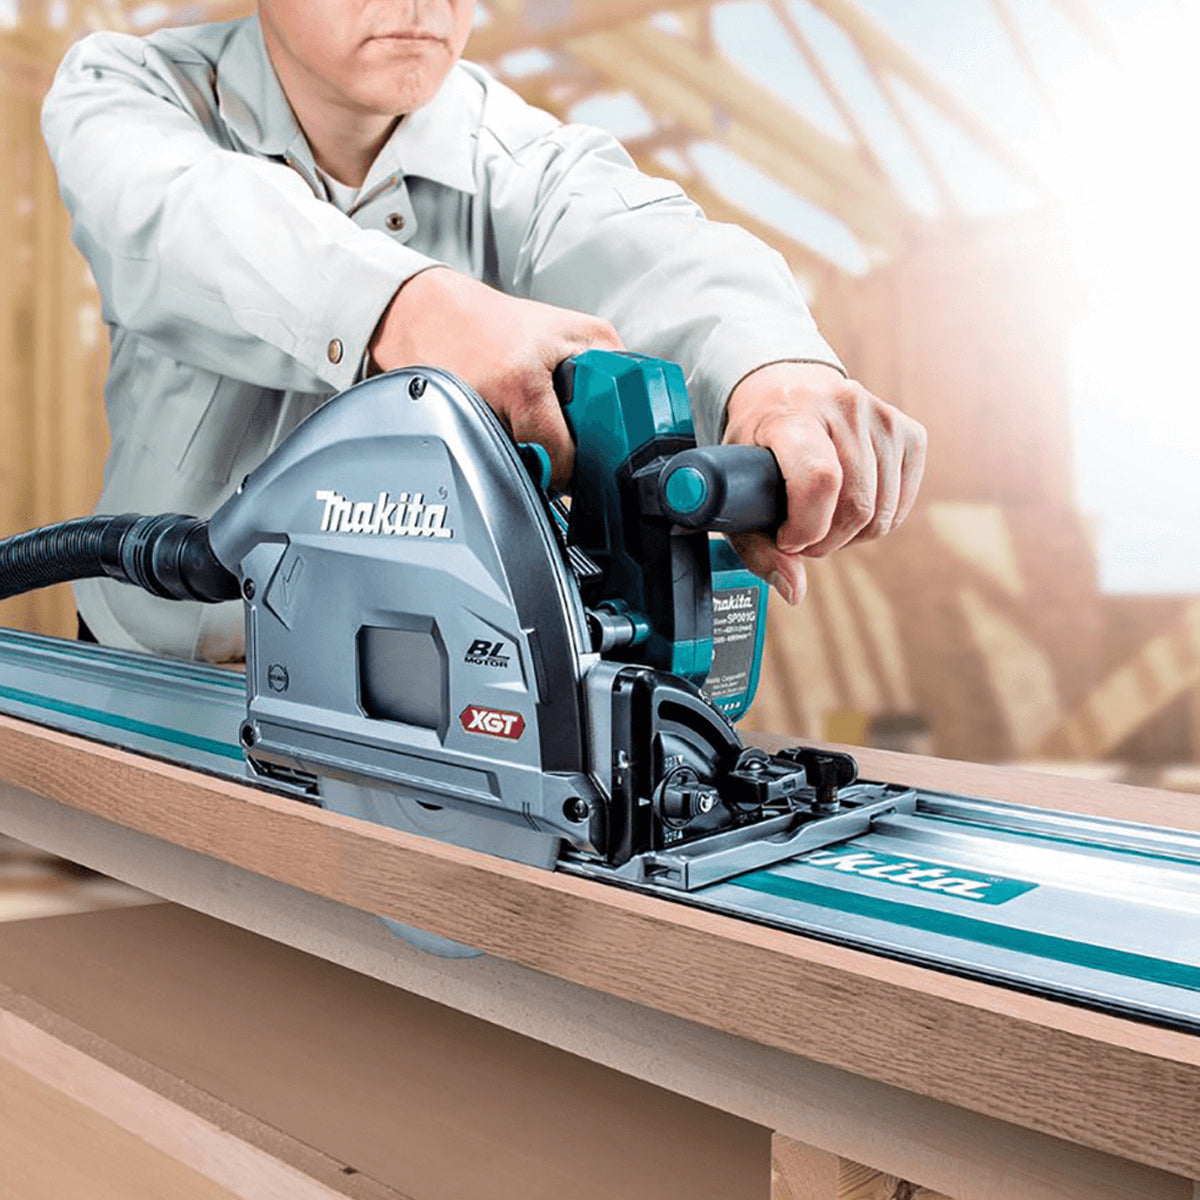 Makita SP001GD202 40VMax XGT 165mm Brushless Plunge Saw with 2 x 2.5Ah Batteries & Charger In Bag